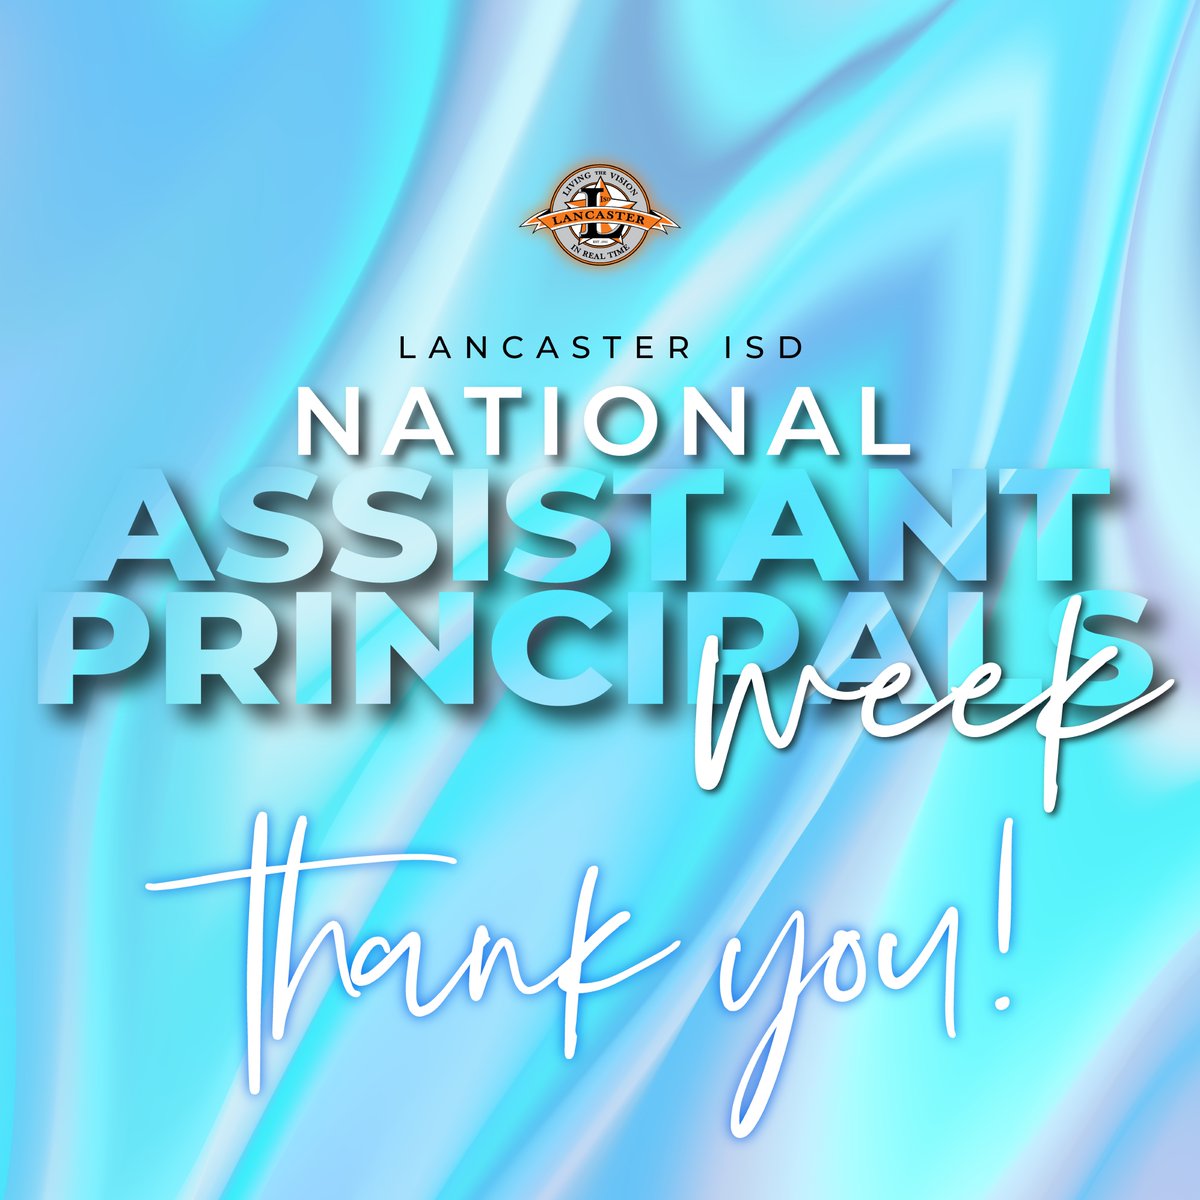 This week is a celebration of our campus assistant principals in honor of #NationalAssistantPrincipalsWeek! This group of educators are the unsung heroes in our education system. Join us in thanking our APs for their hard work & dedication! #InspireEmpowerRoar #APWEEK